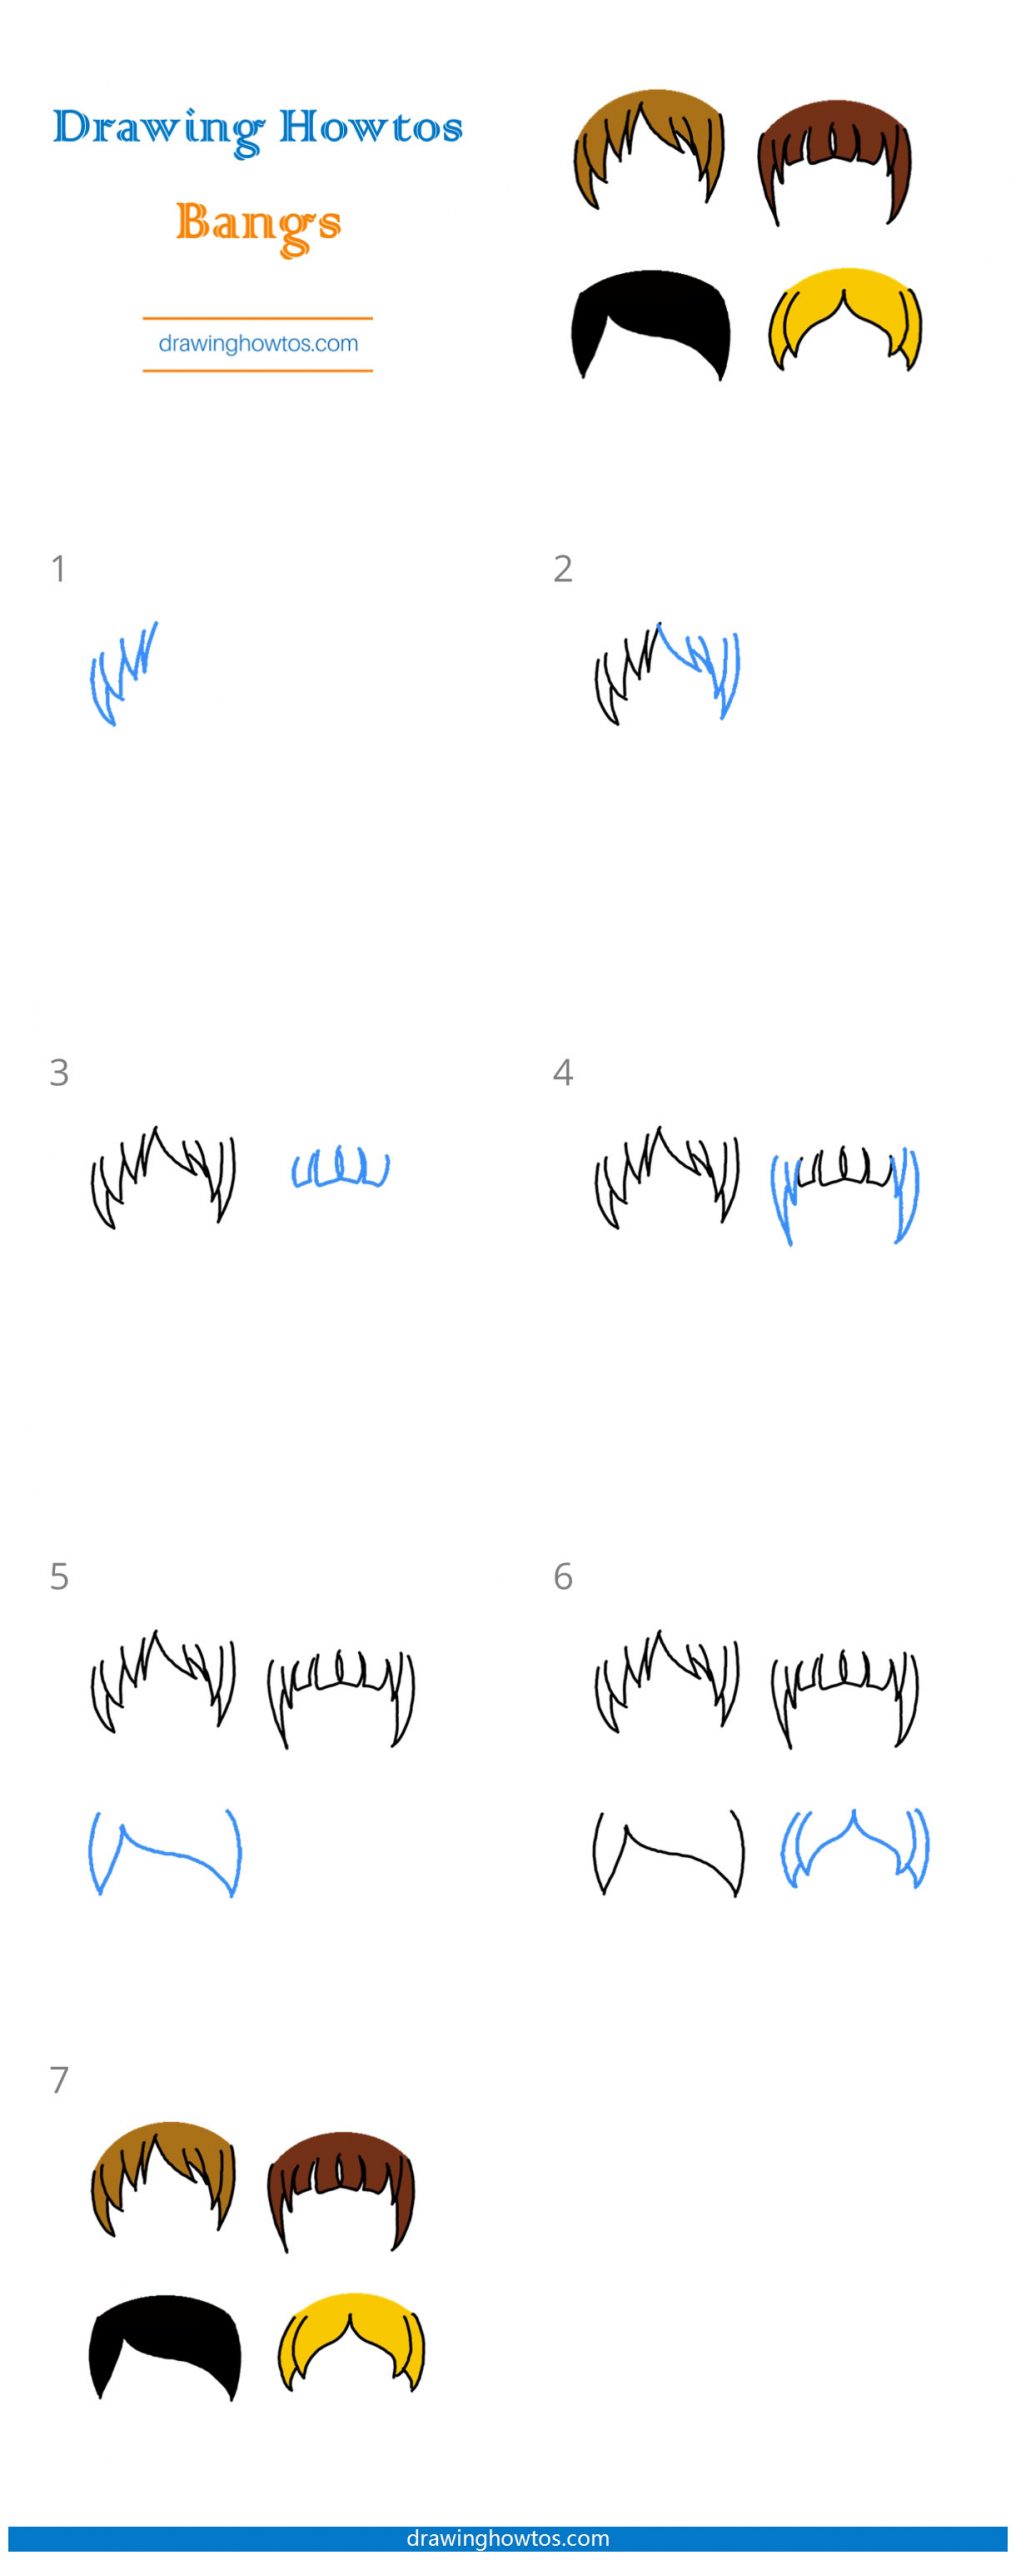 How to Draw Bangs Step by Step